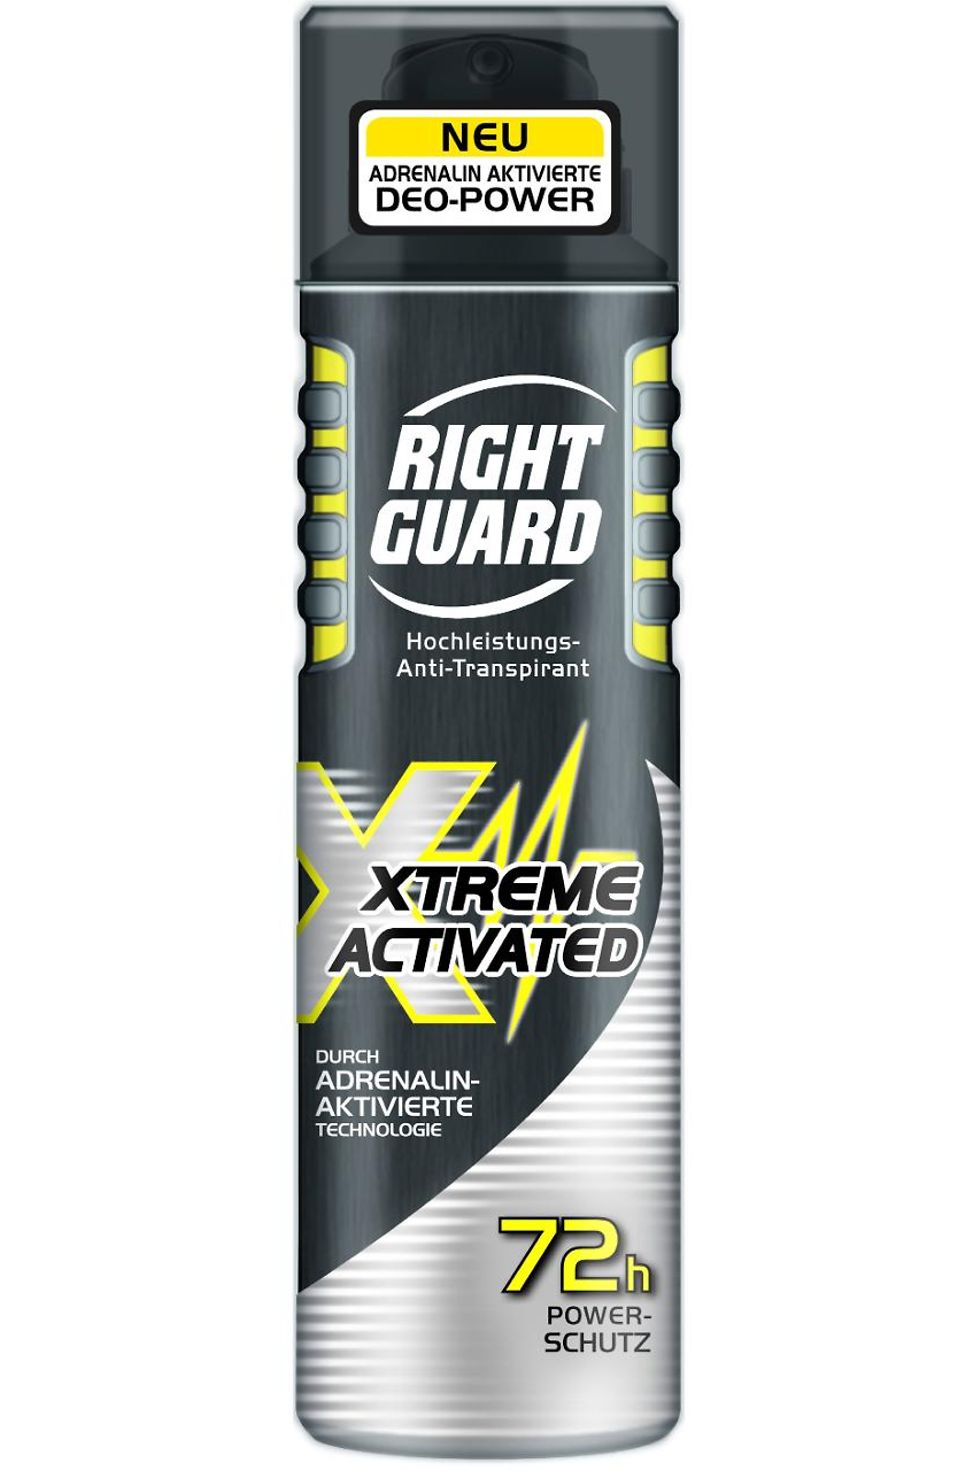 Right Guard Xtreme Activated Hochleistungs-Anti-Transpirant Deospray